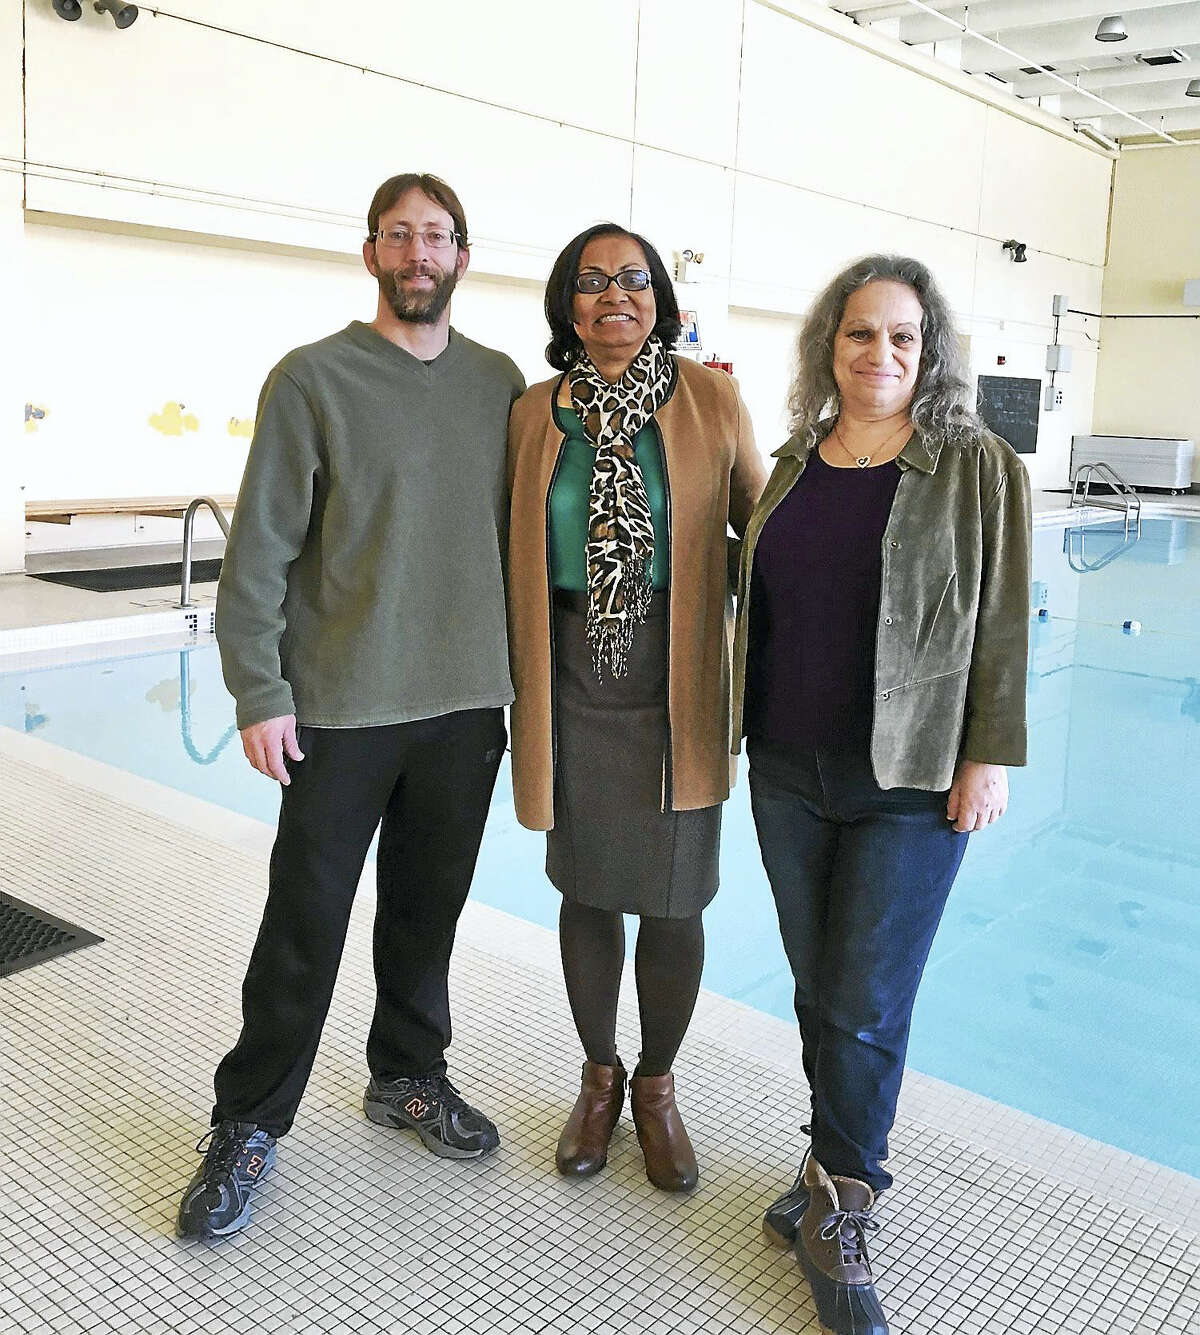 From left, Kacey Rosenfield, aquatic instructor at Conte-West Magnet School; Principal Dianne Spence and neighbor Heidi Korrick at the pool which will be opened to the public in a short trial run.